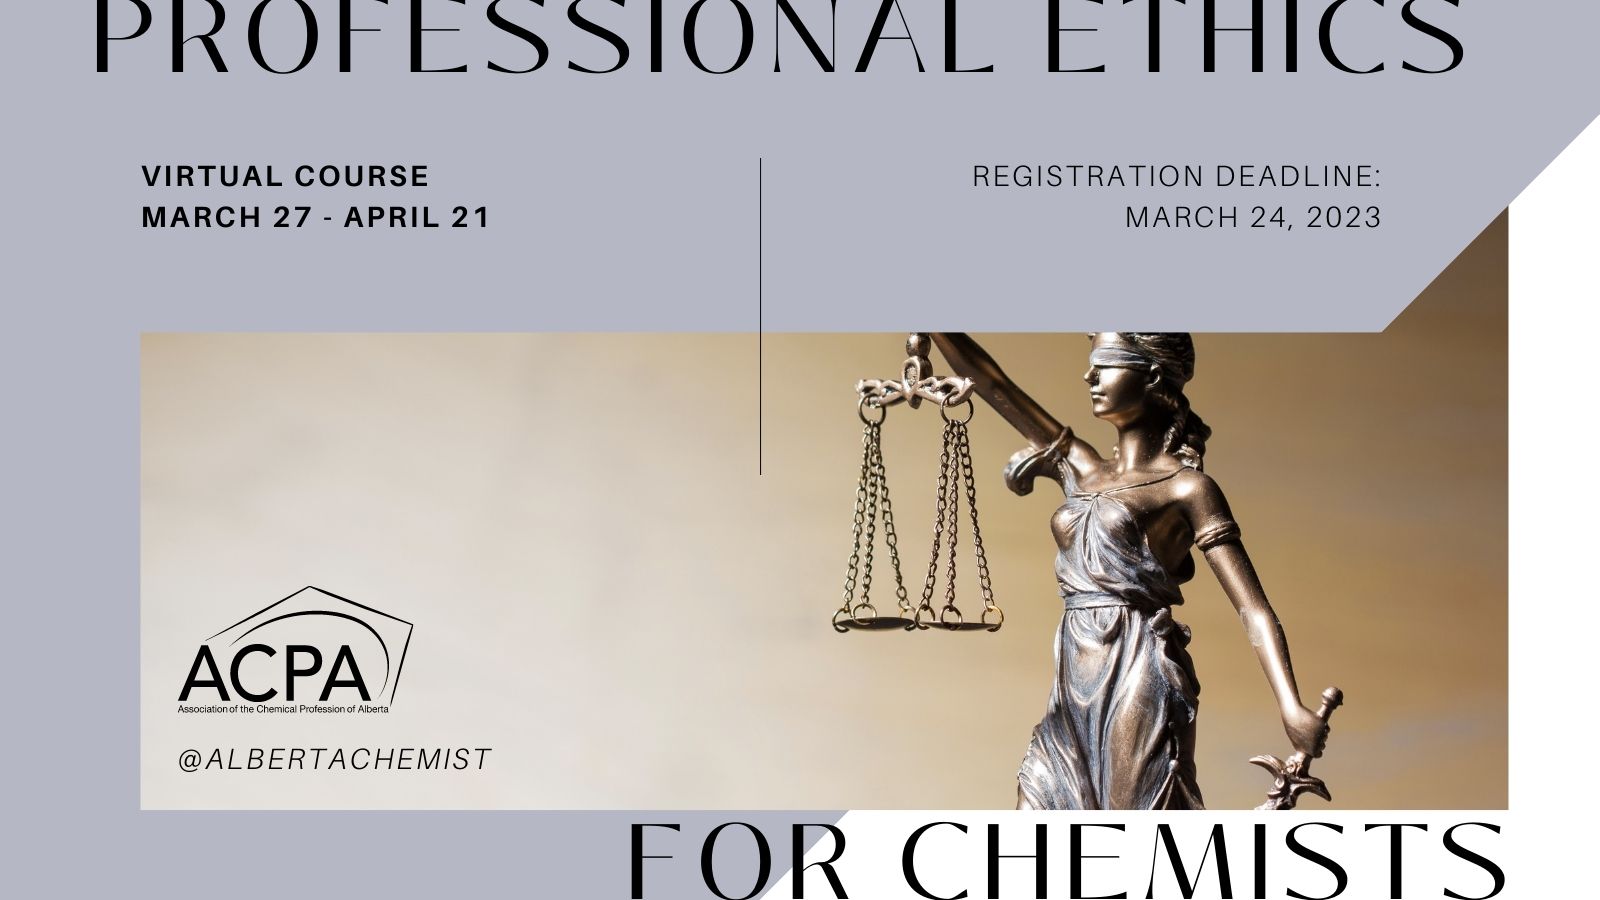 Banner 5 - ACPA Professional Ethics for Chemists Course